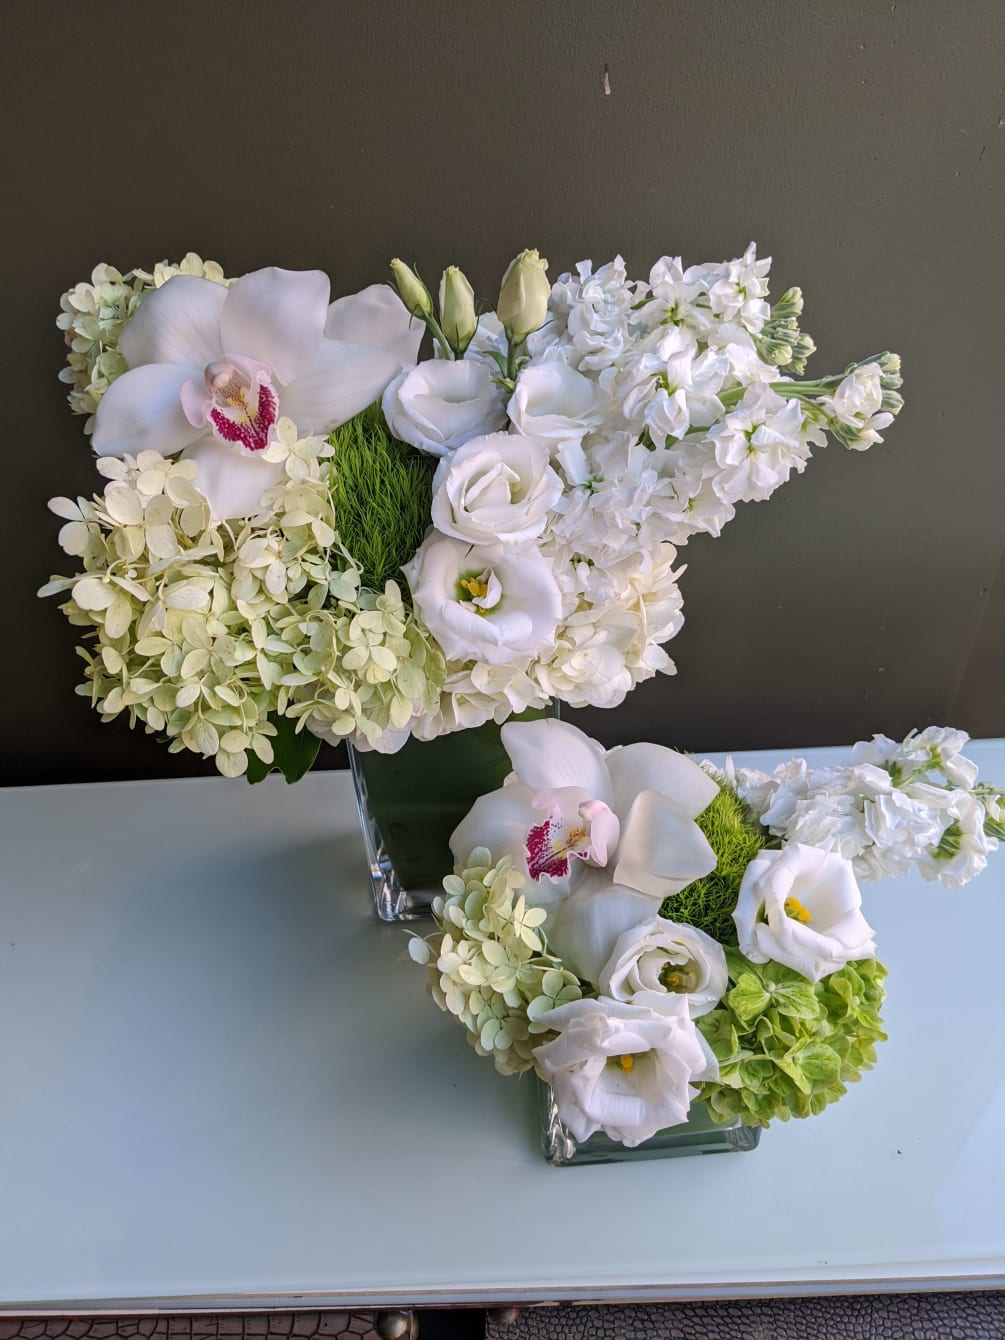 this design features 2 arrangements with white and green hydrangea, dianthus, orchids